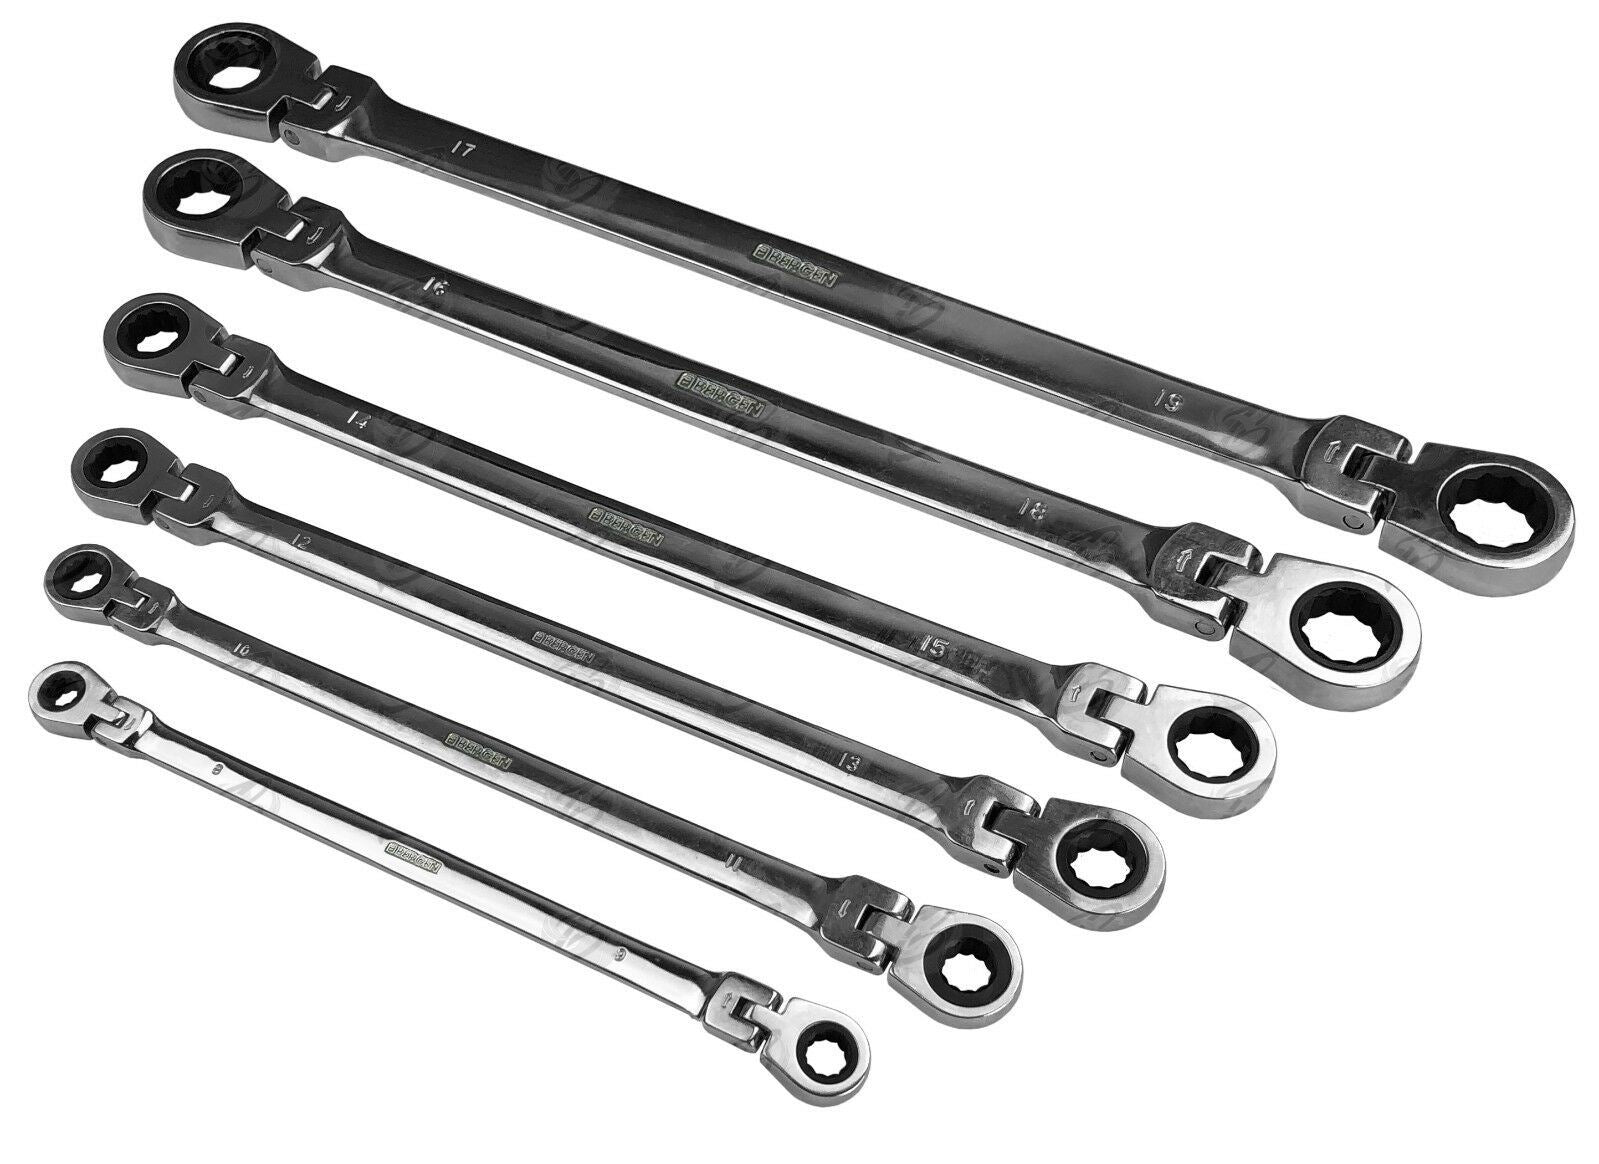 US PRO 10PCS DOUBLE RING EXTRA LONG RATHCET AVIATION SPANNERS 8MM - 19MM